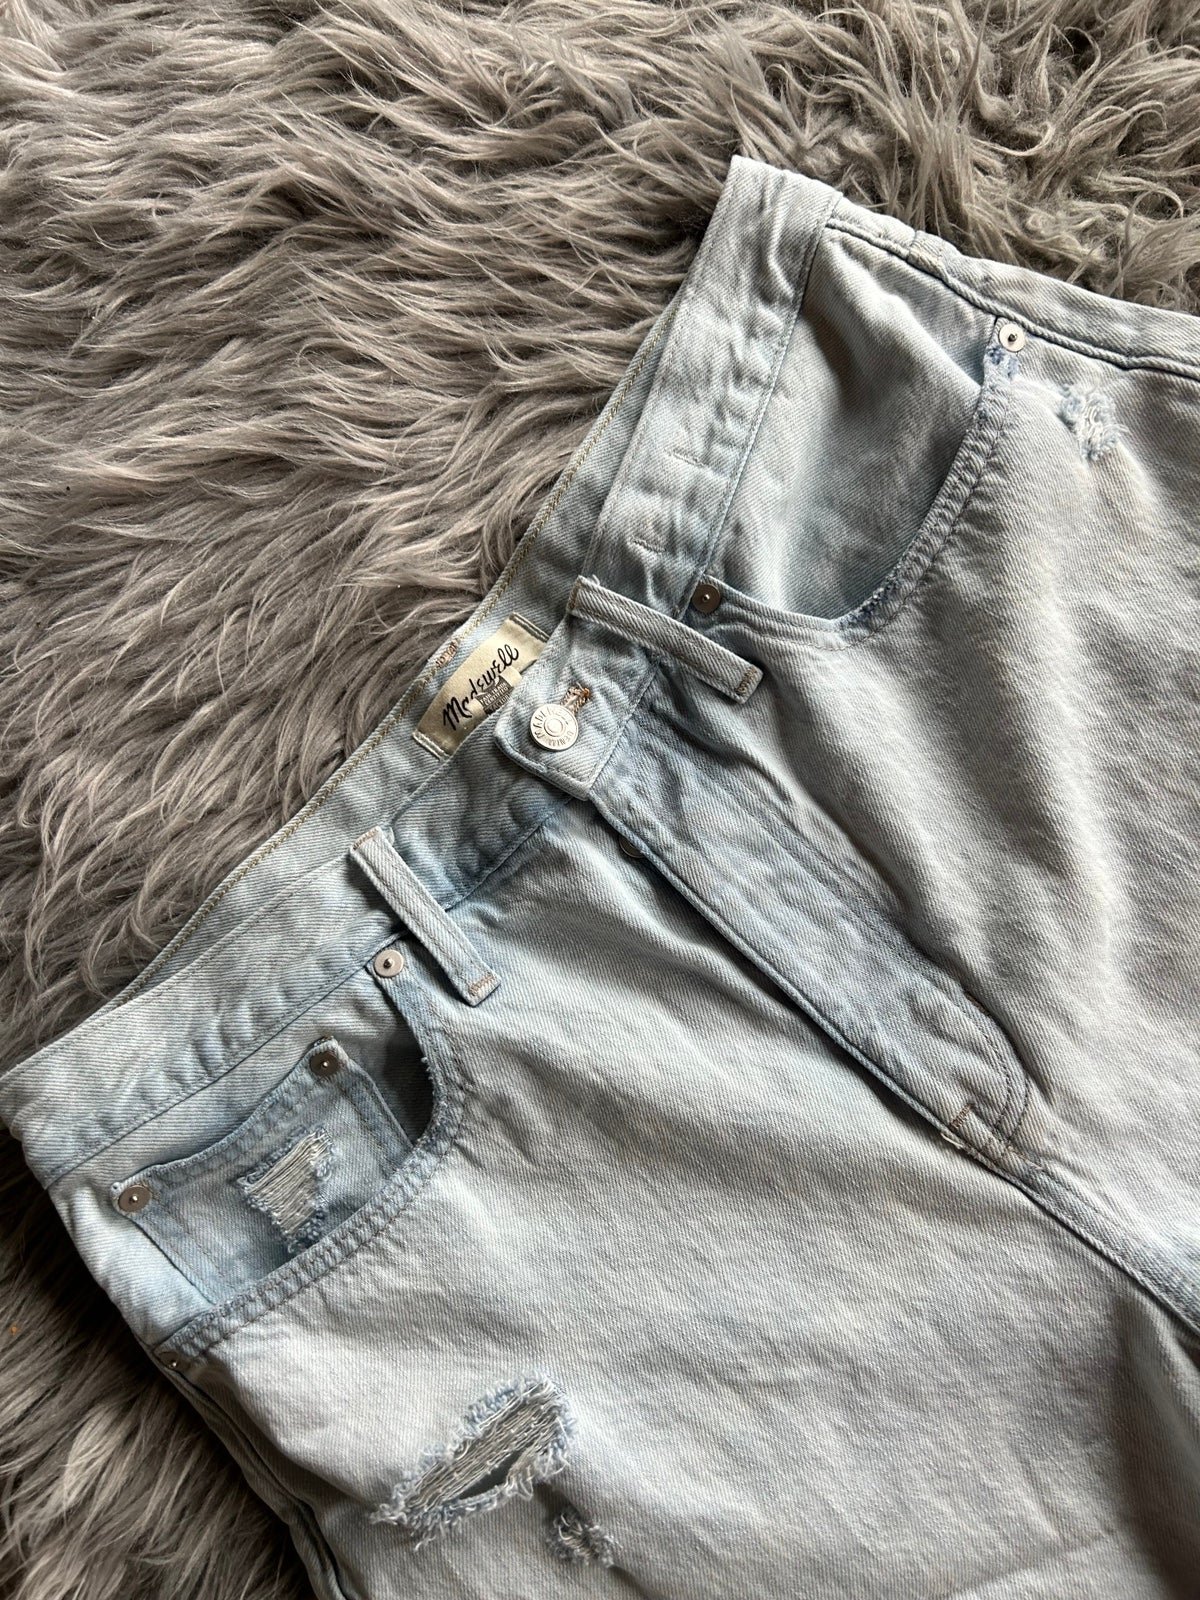 Discounted Madewell jean shorts iSdCDB26r Outlet Store